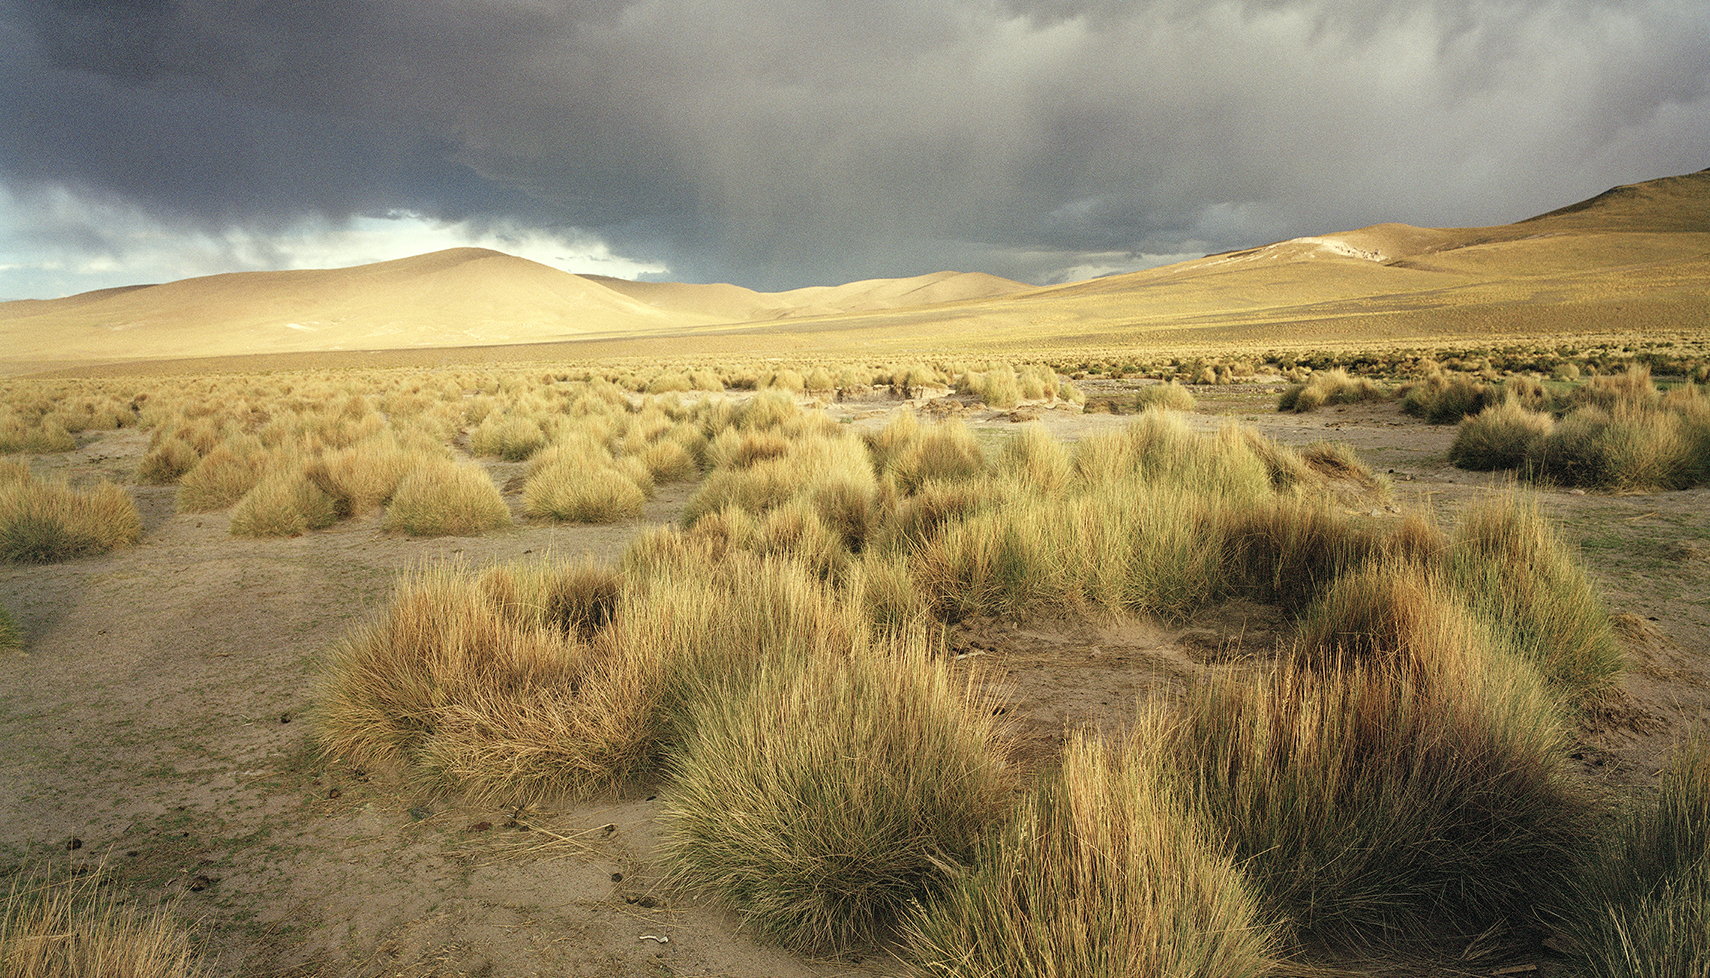 grassy desert with stormy sky in the background